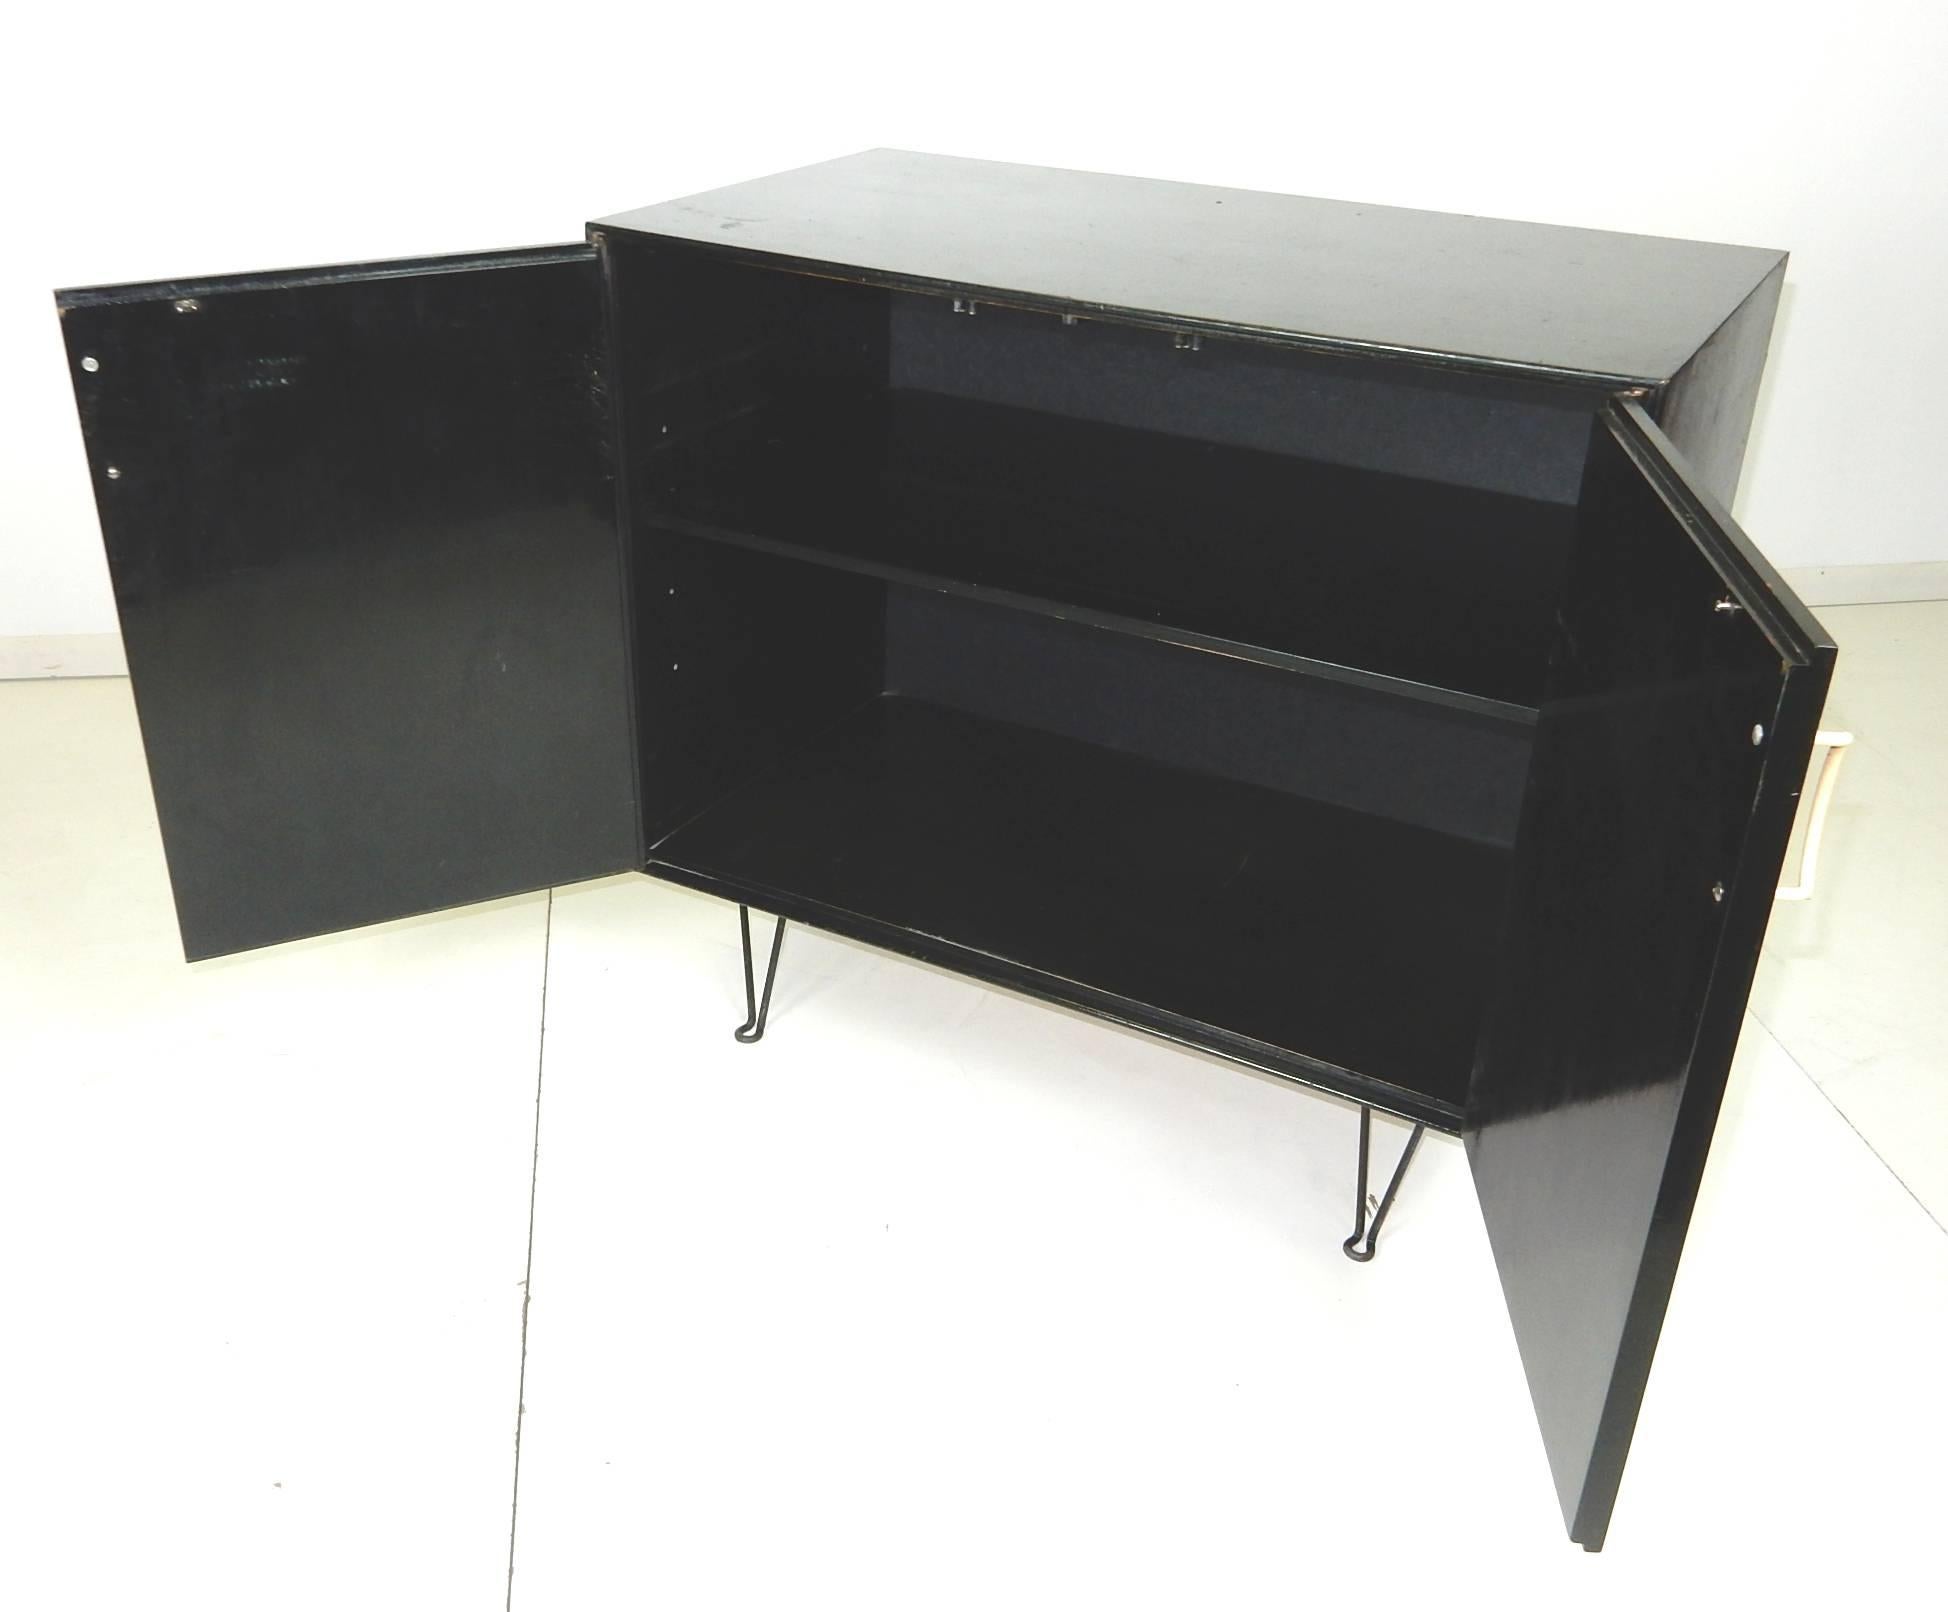 Early 1950s two-door cabinet from the thin-line line designed by George Nelson
for Herman Miller.
Single adjustable inner shelf. Wire pulls and legs.
Completely original with no damage or repairs.